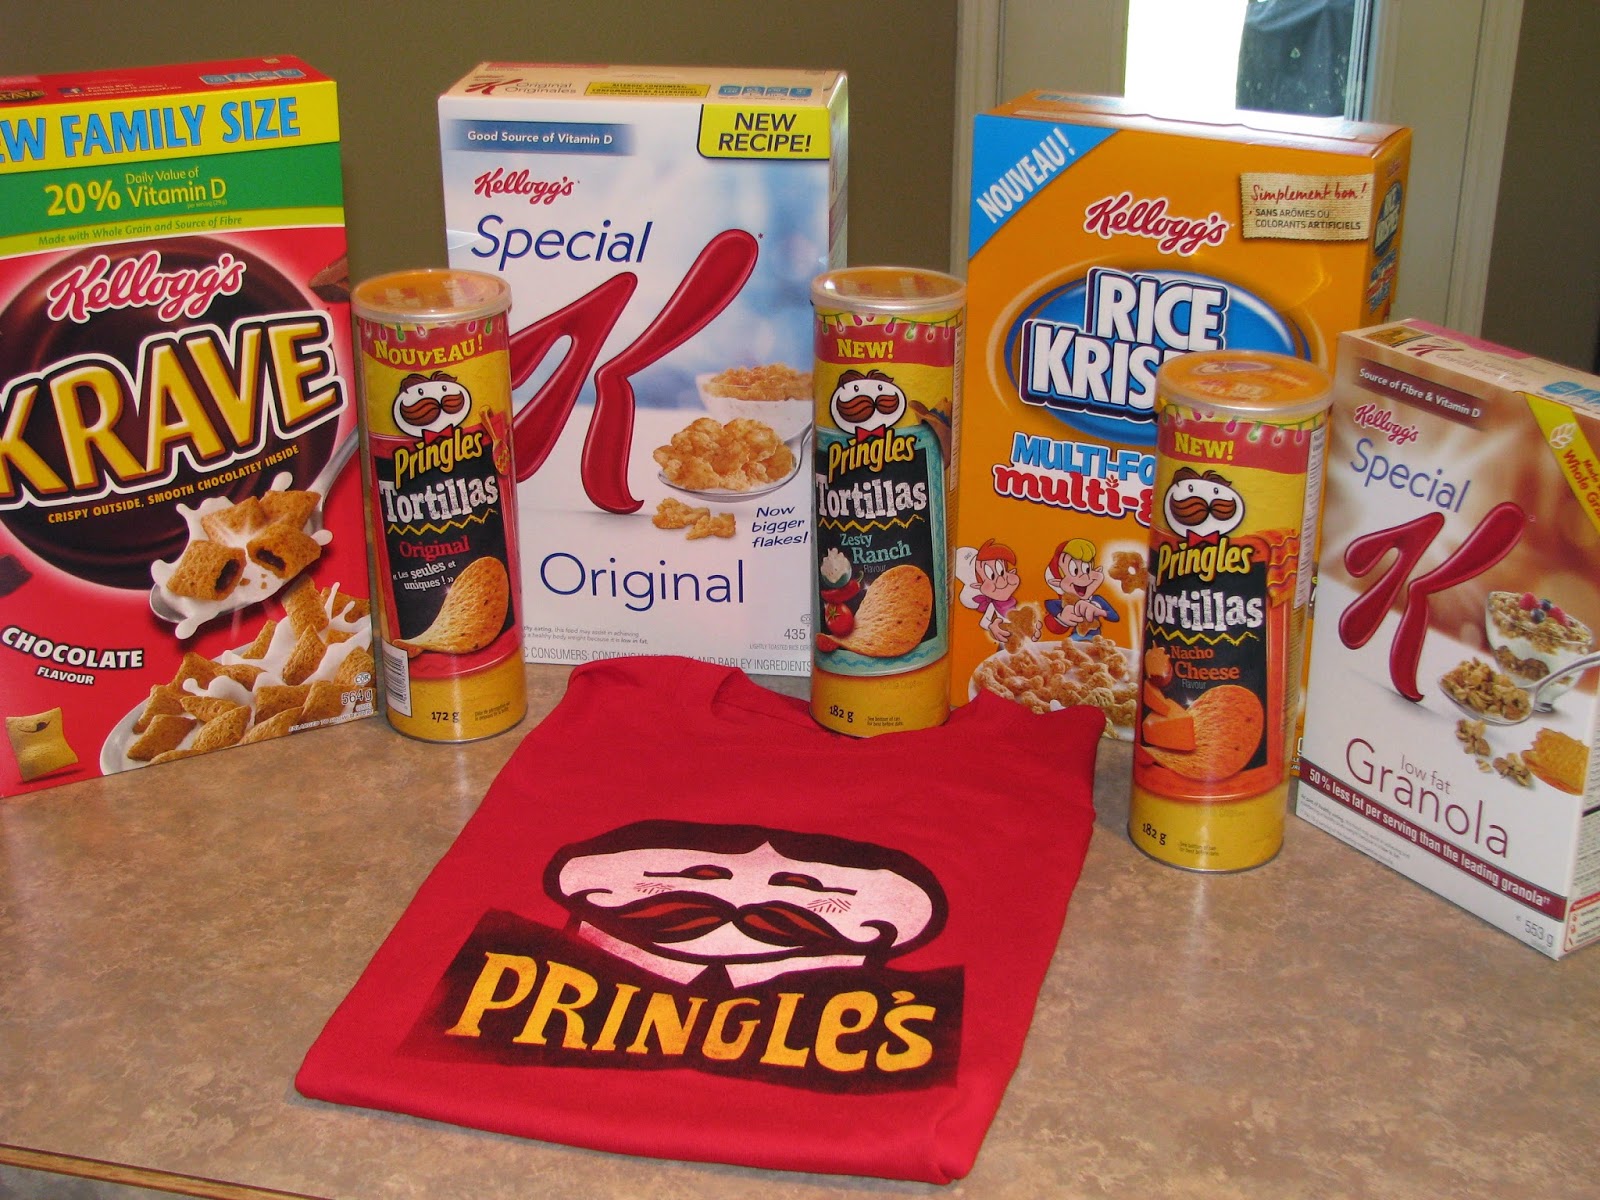 Kellogg's Innovation Prize Pack | Addicted to Recipes contest